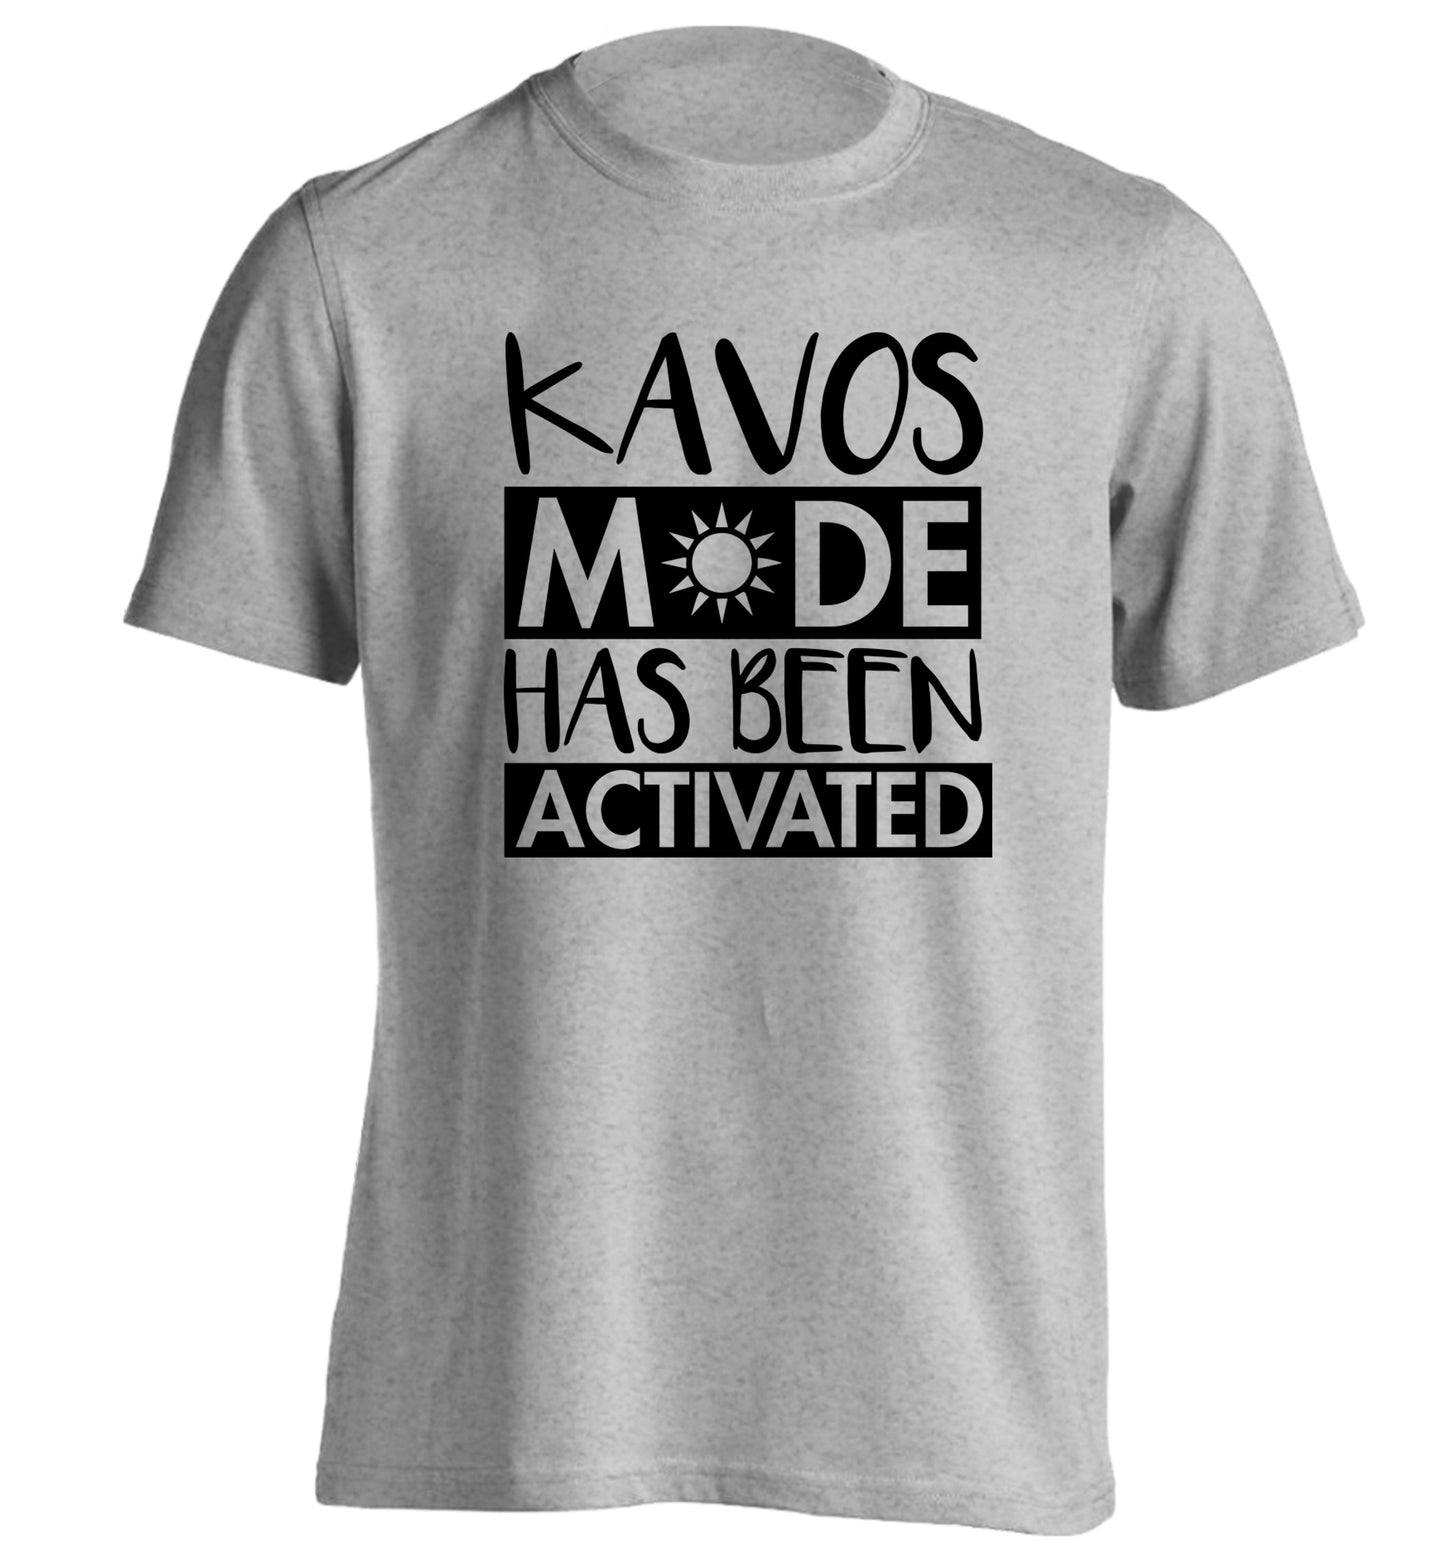 Kavos mode has been activated adults unisex grey Tshirt 2XL